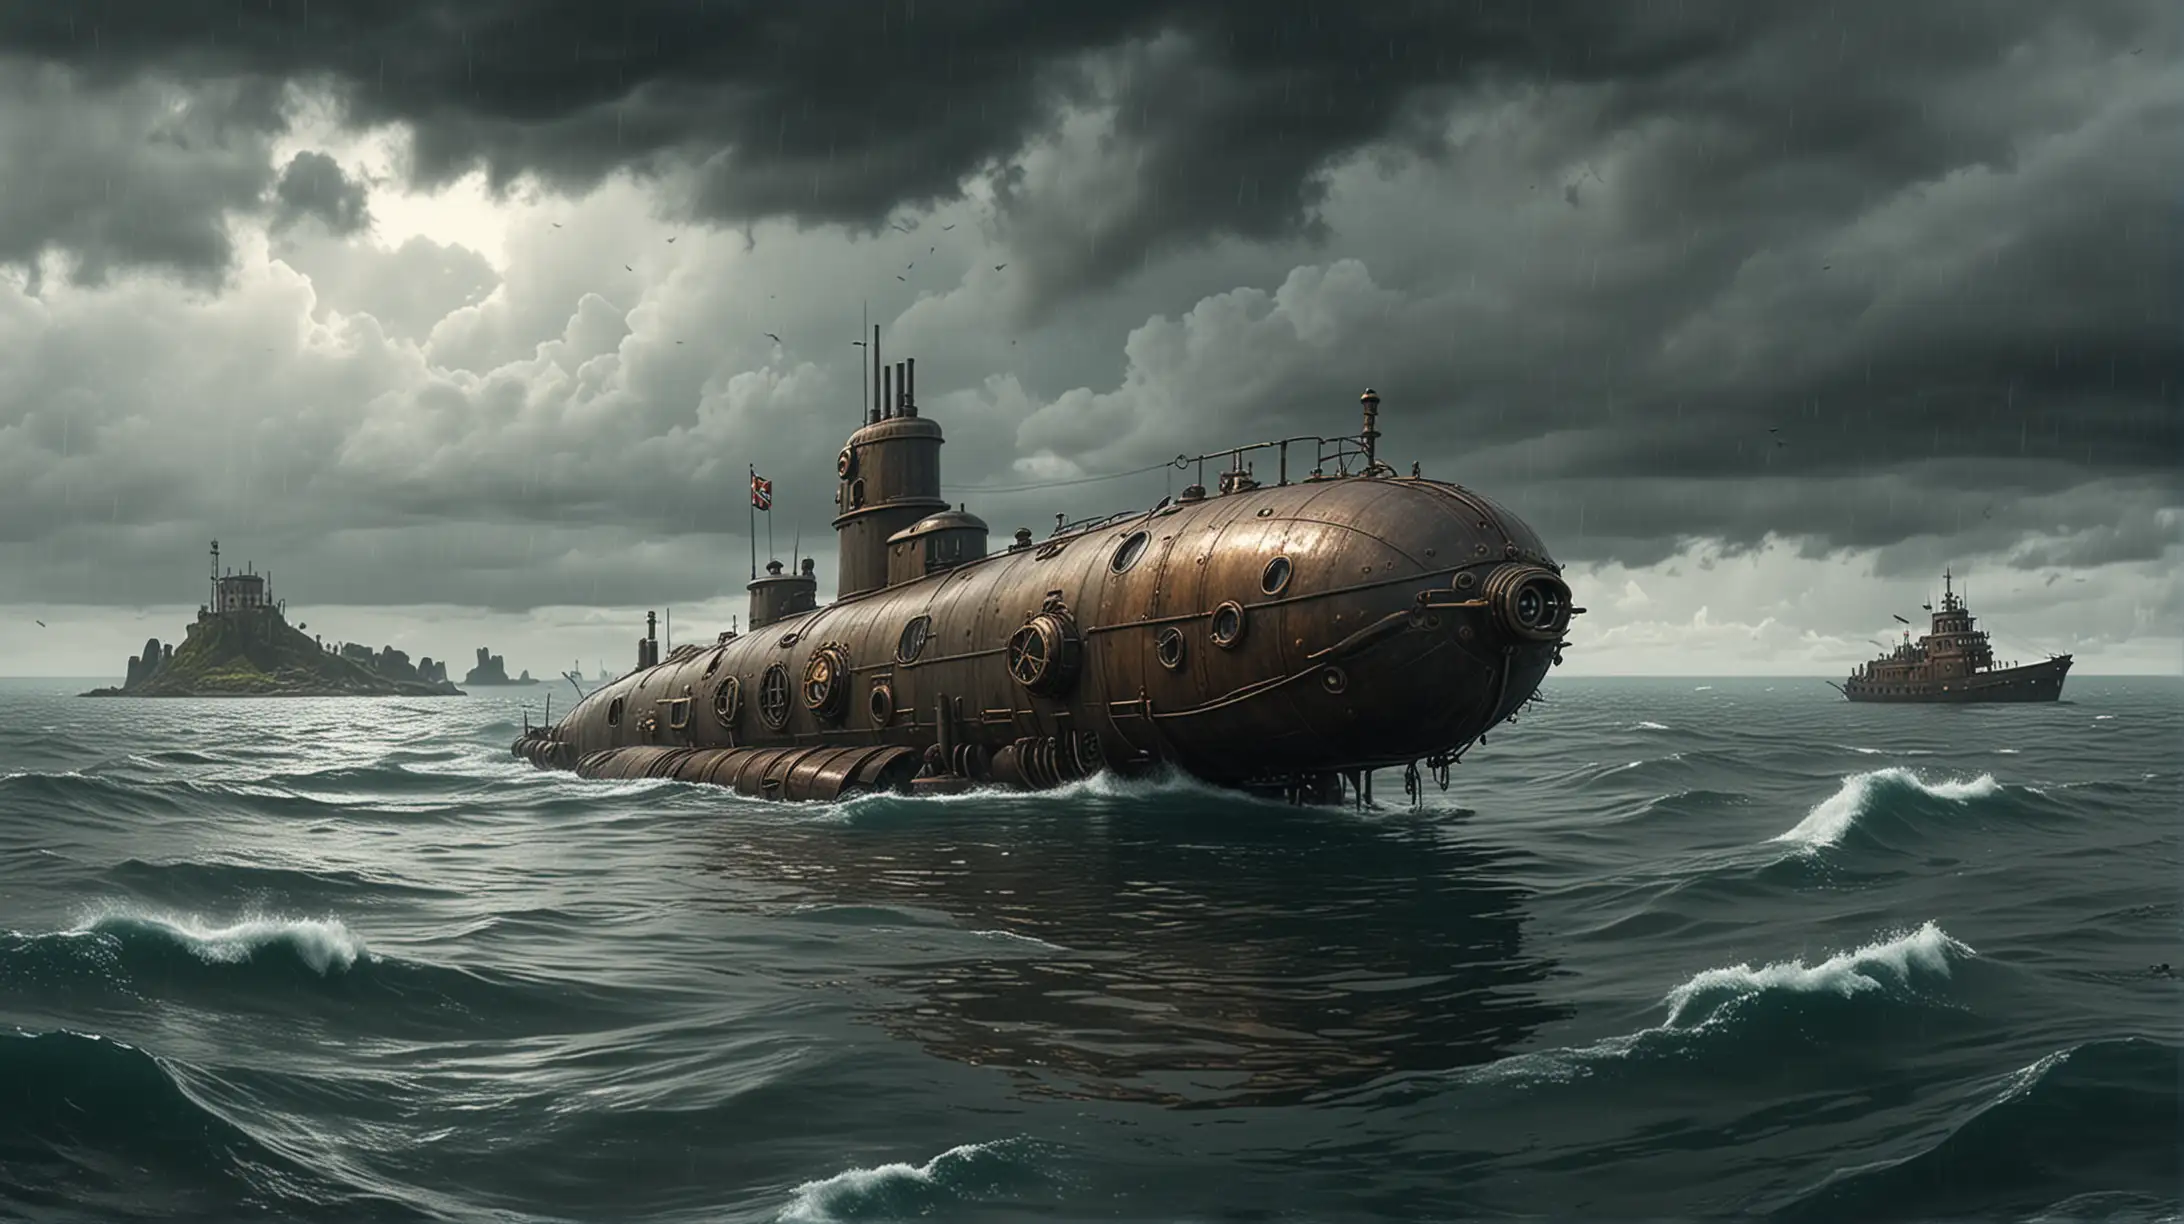 a steampunk submarine on the surface of a troubled sea, small island with a village visibe on the horizor, cloudy and rainy